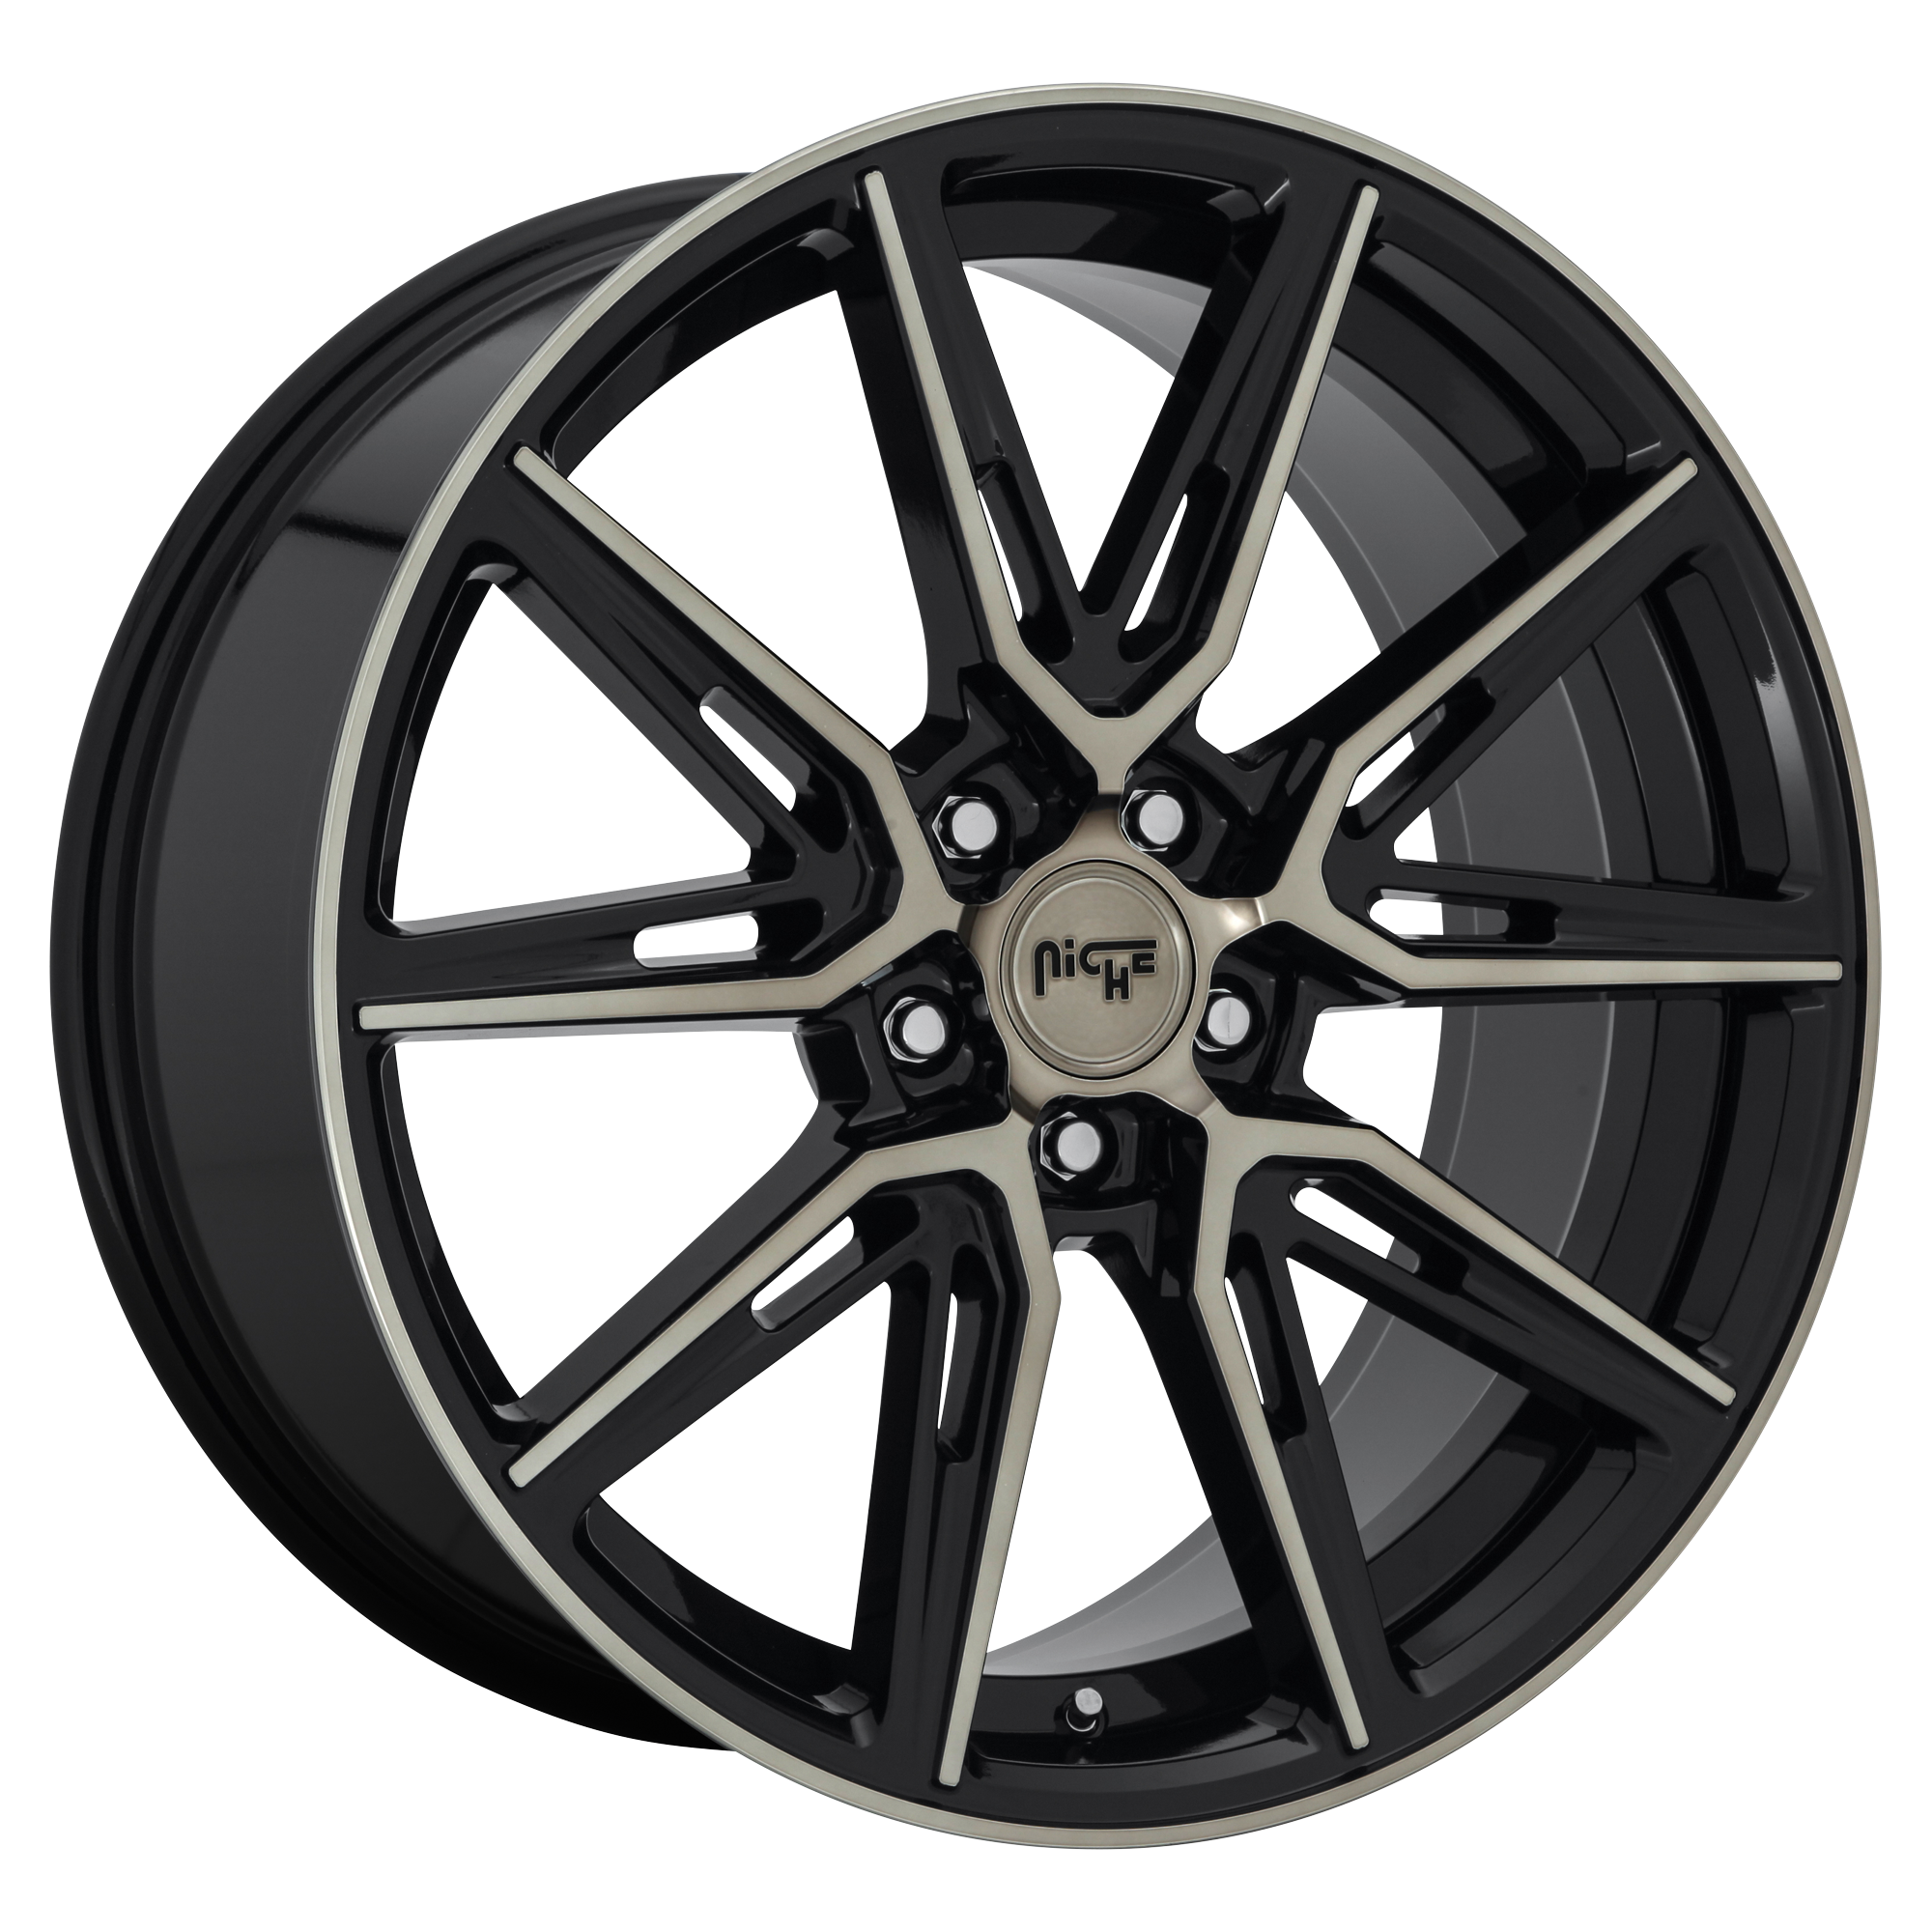 GEMELLO 20x9 5x112.00 GLOSS MACHINED DOUBLE DARK TINT (38 mm) - Tires and Engine Performance